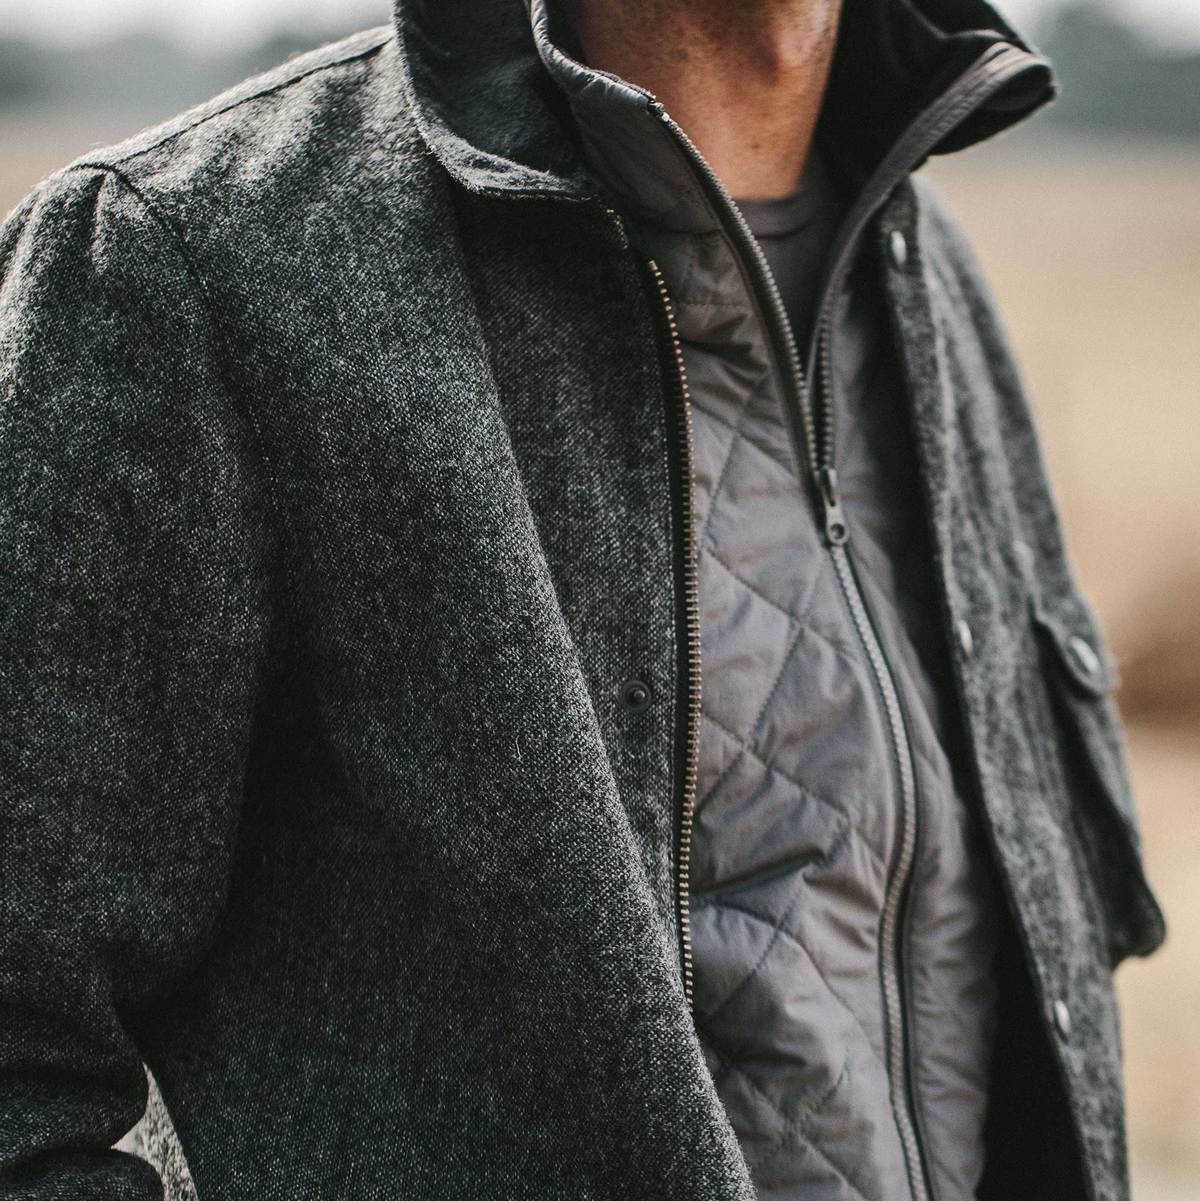 Taylor Stitch Rover Jacket in Charcoal Birdseye Waxed Wool | The Coolector